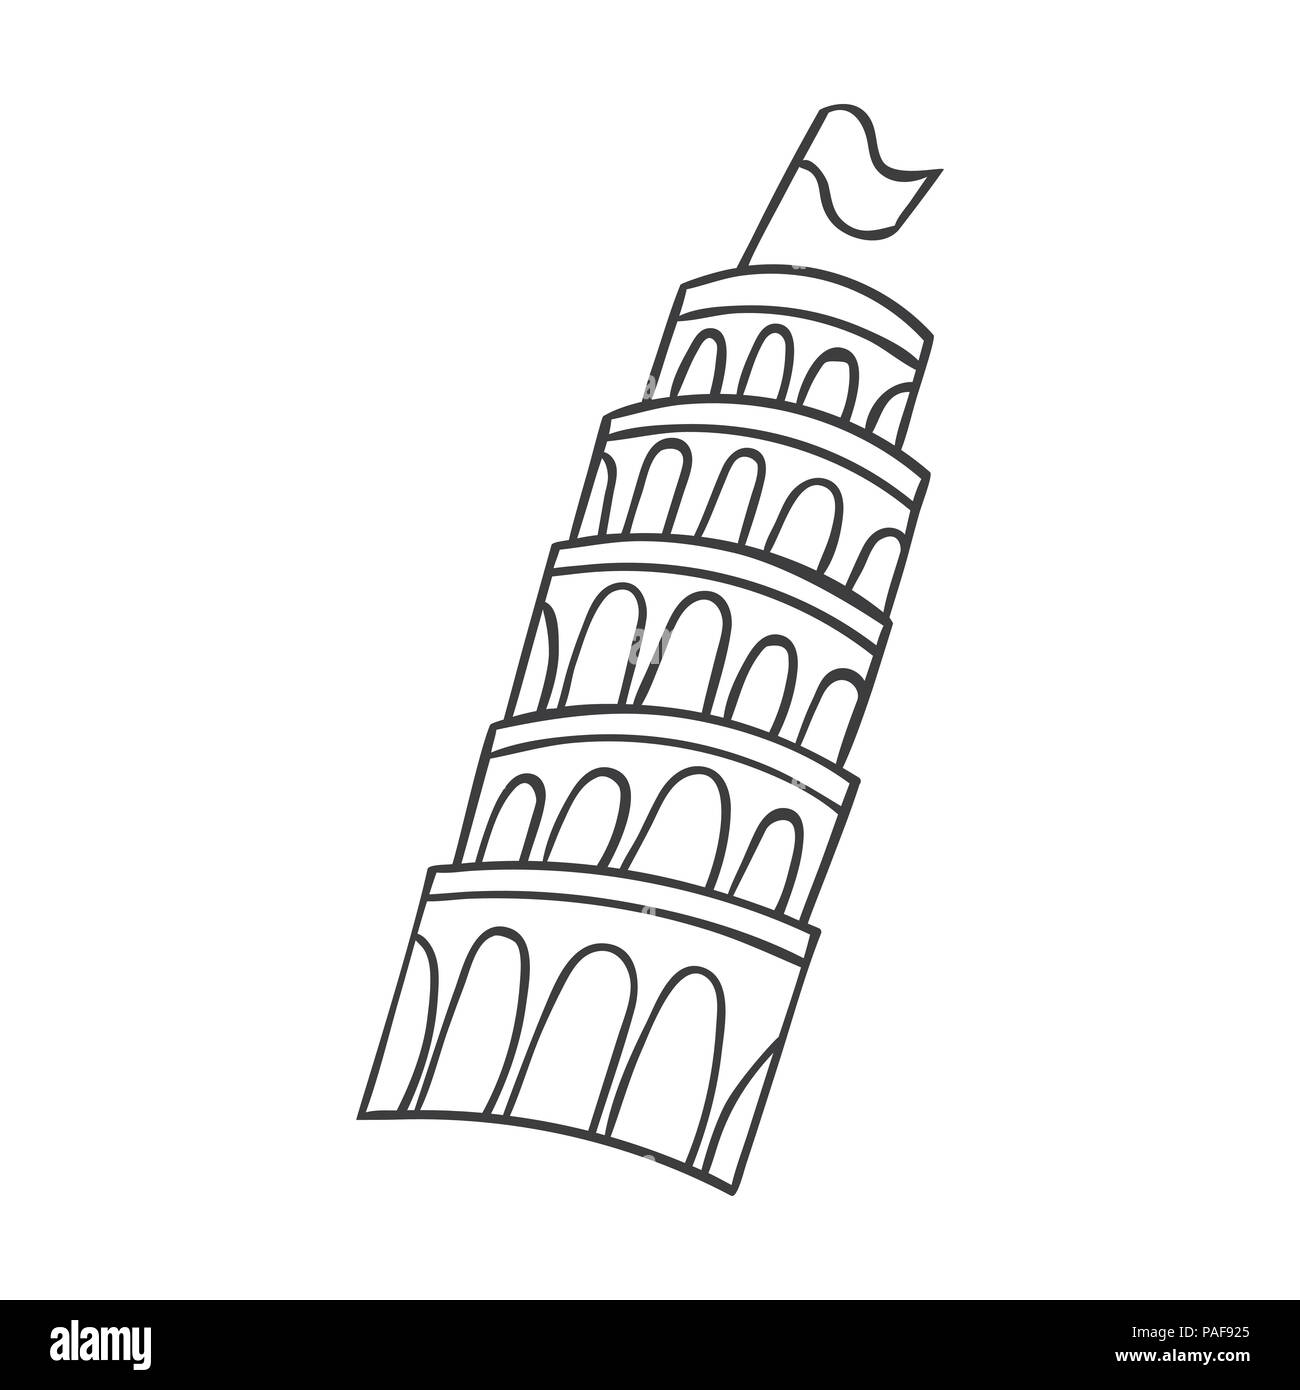 Tower of Pisa in Italy icon in outline style isolated on white ...